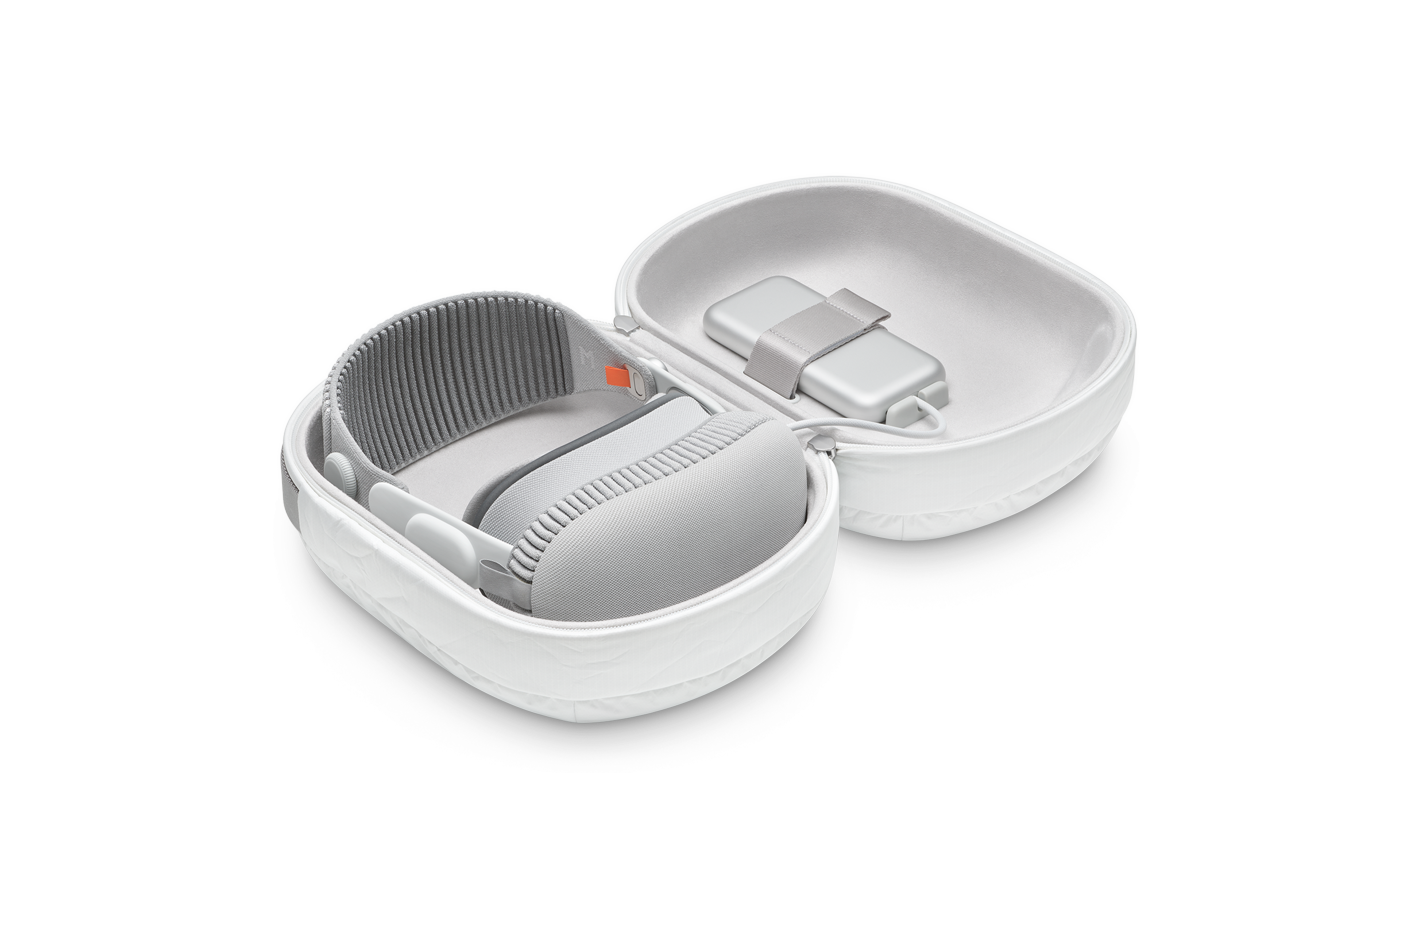 Interior, open oval Travel Case containing Apple Vision Pro assembled with Solo Knitted Band, grey cover, Battery and Power Cable secured by strap